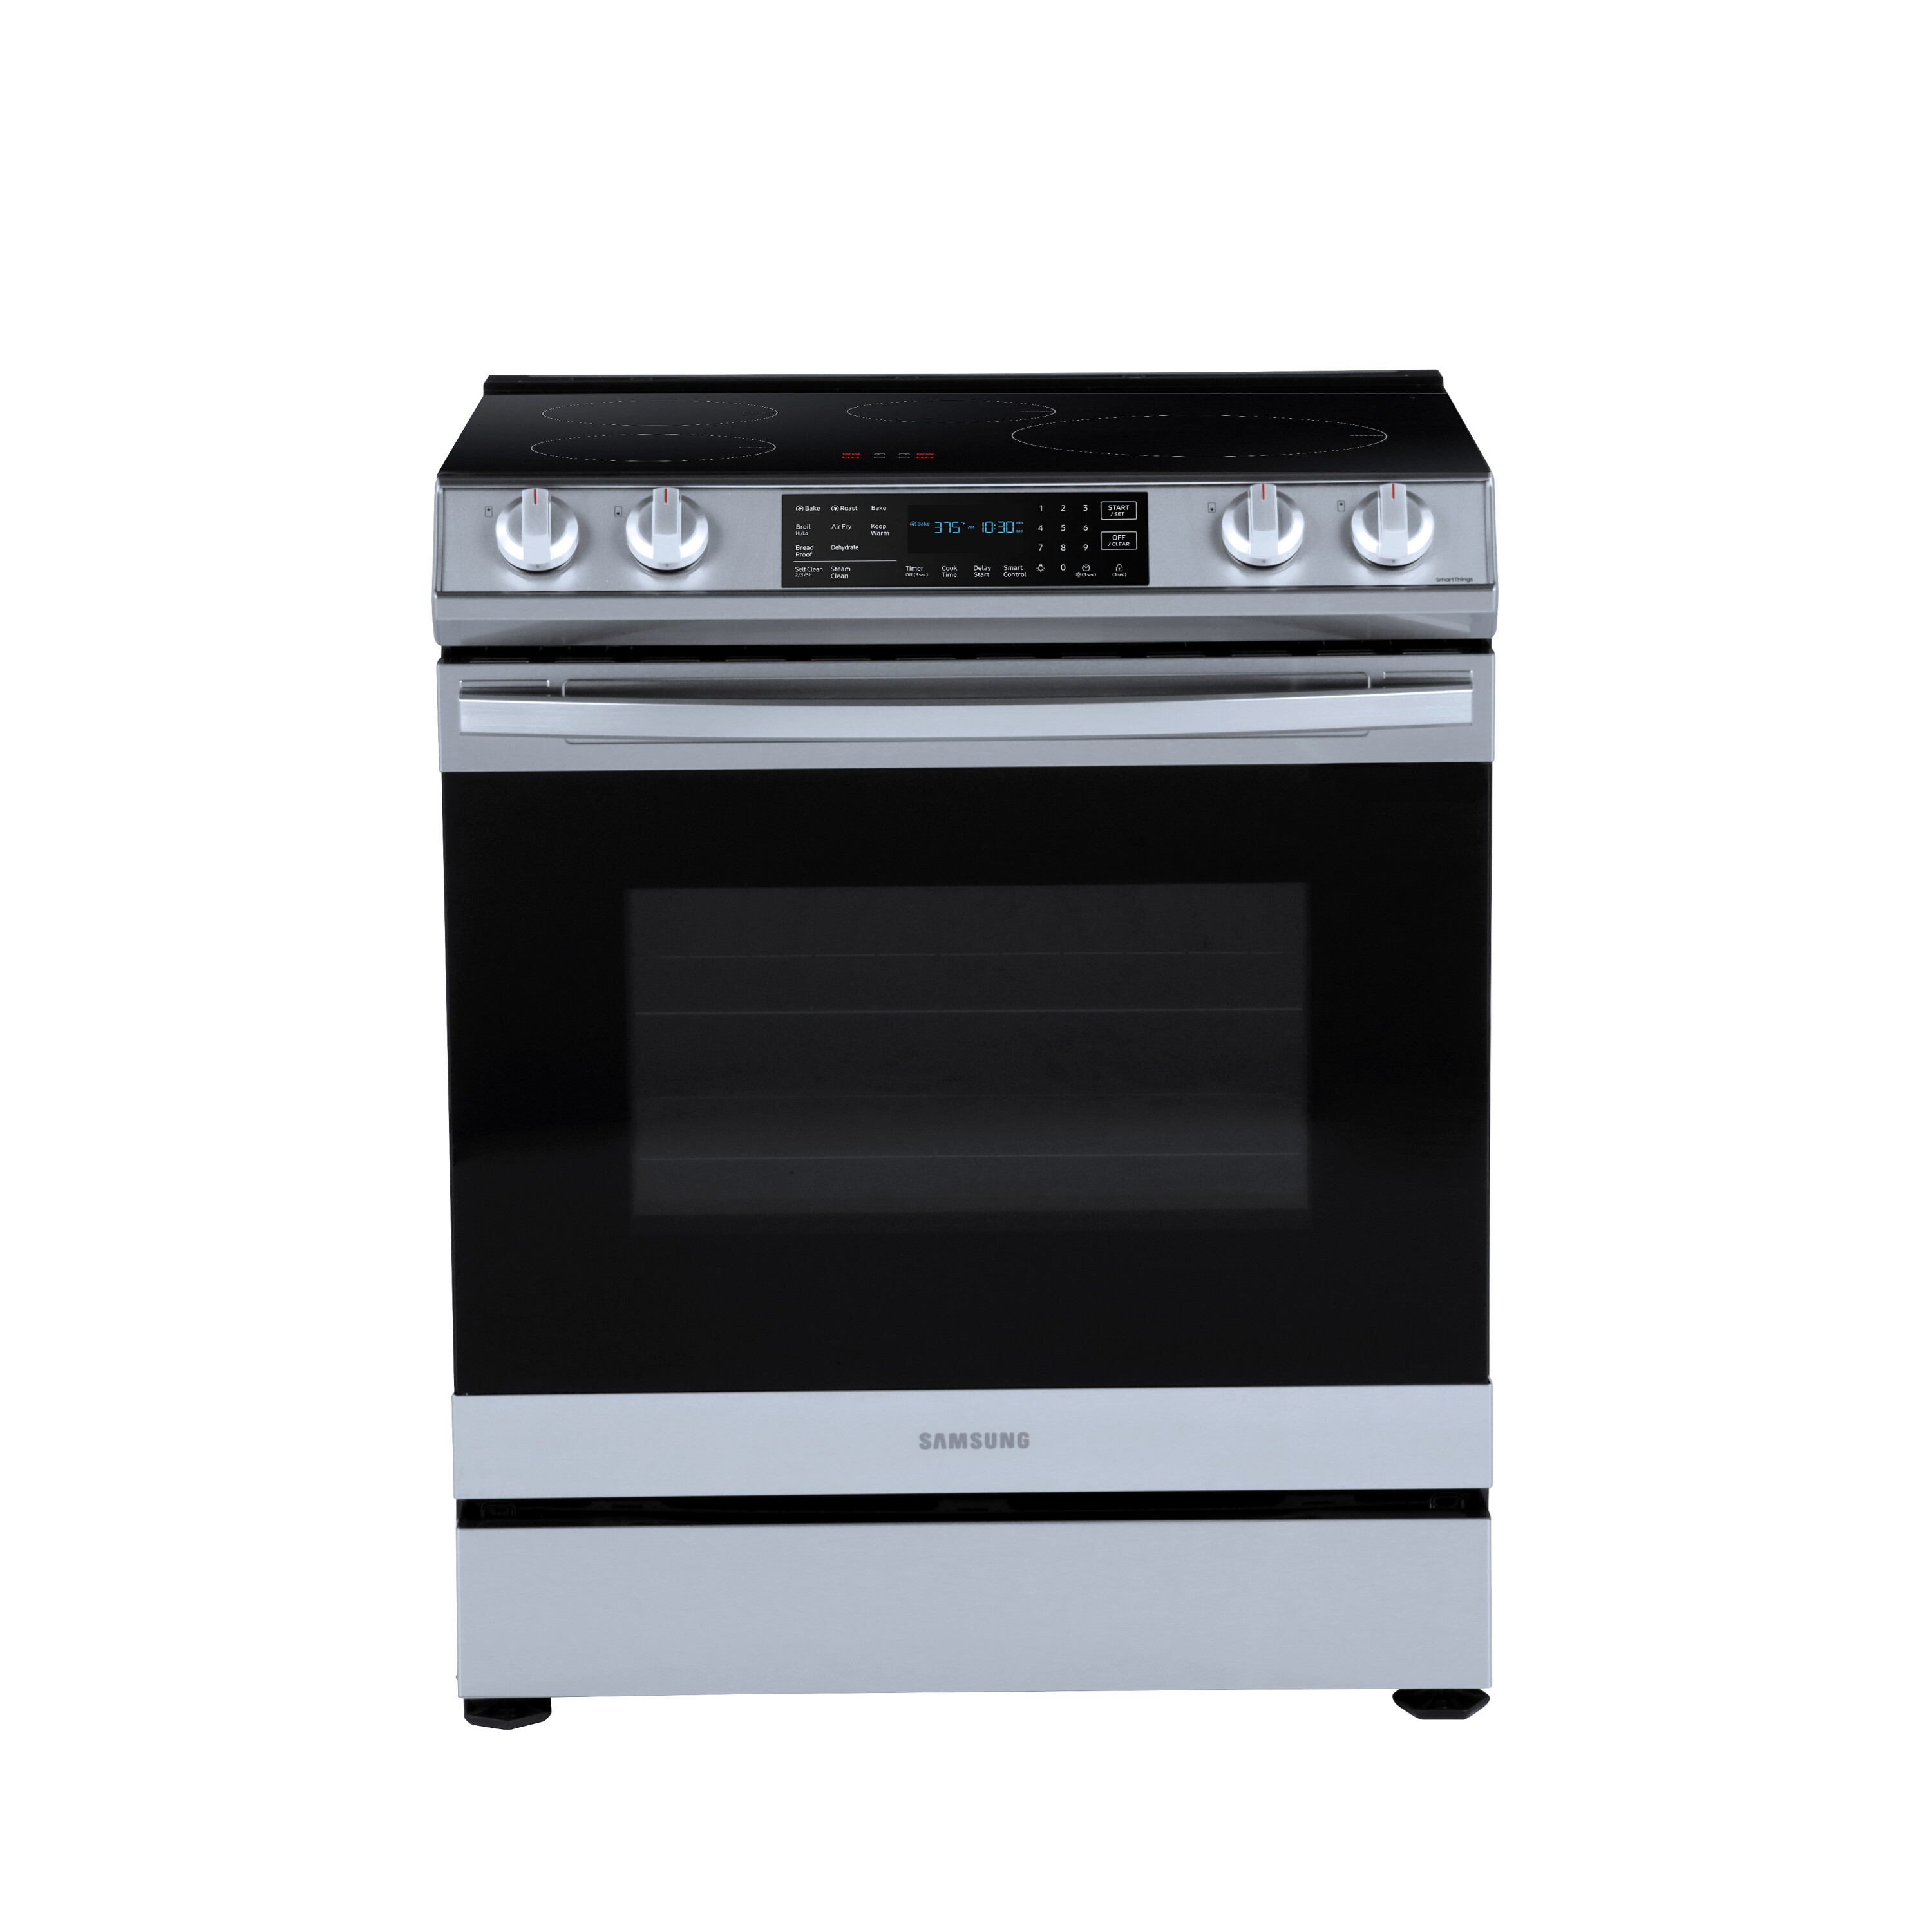 Samsung - 6.3 Cu. ft. Smart Instant Heat Slide-in Induction Range with Air Fry & Convection+ - Black Stainless Steel